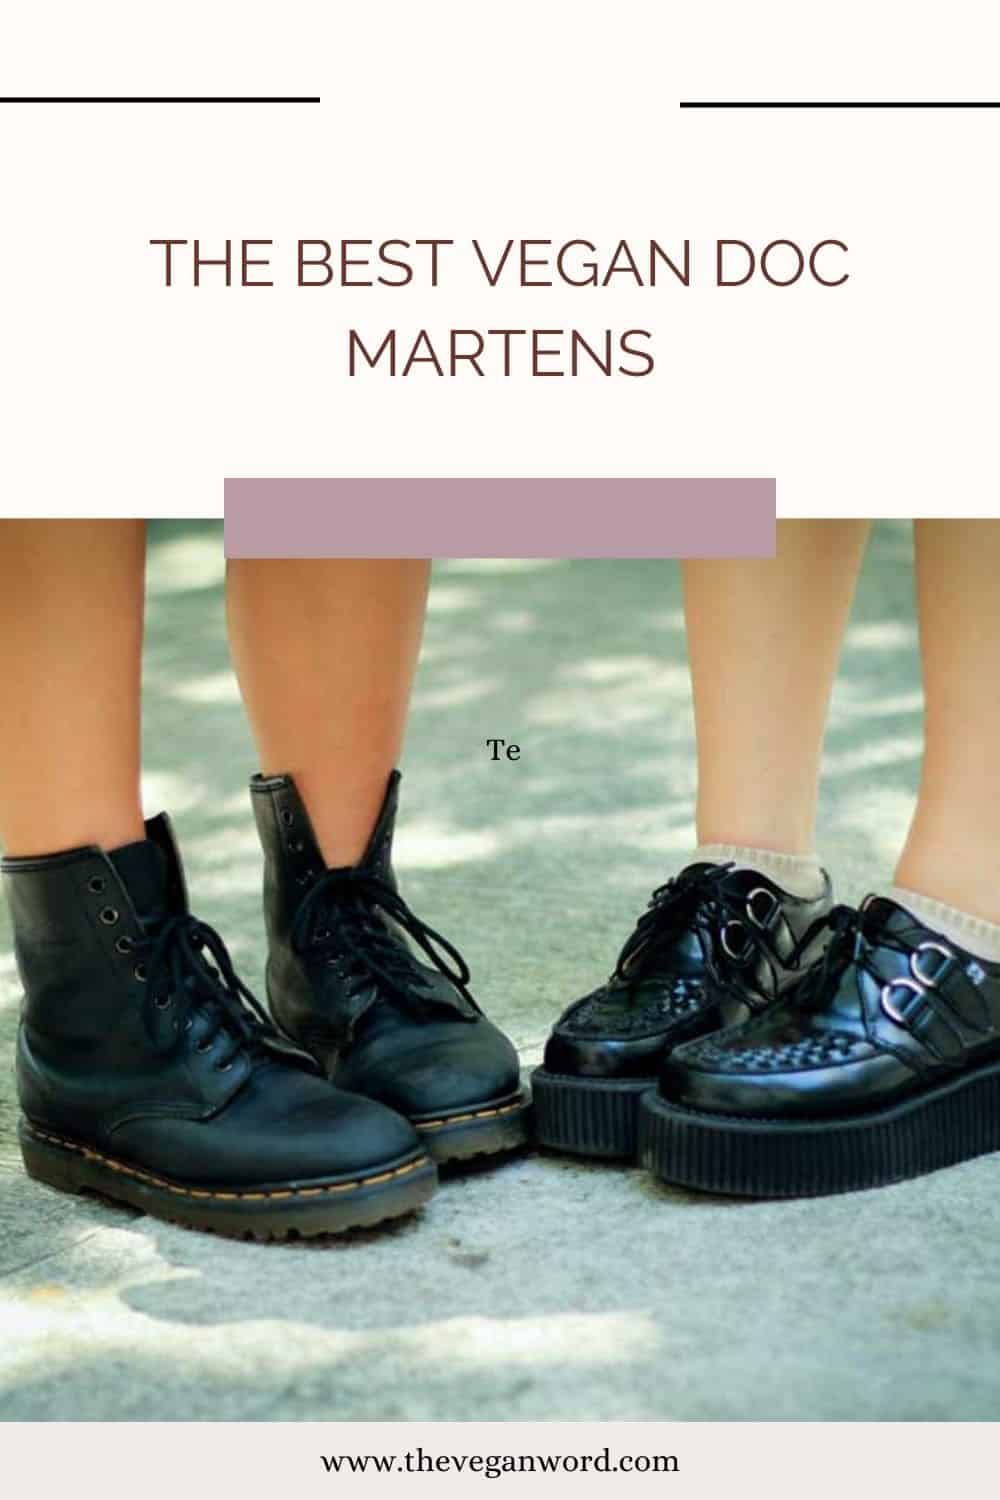 Pinterest image showing Two people wearing black Doc Martens boots and text "the best vegan doc martens"